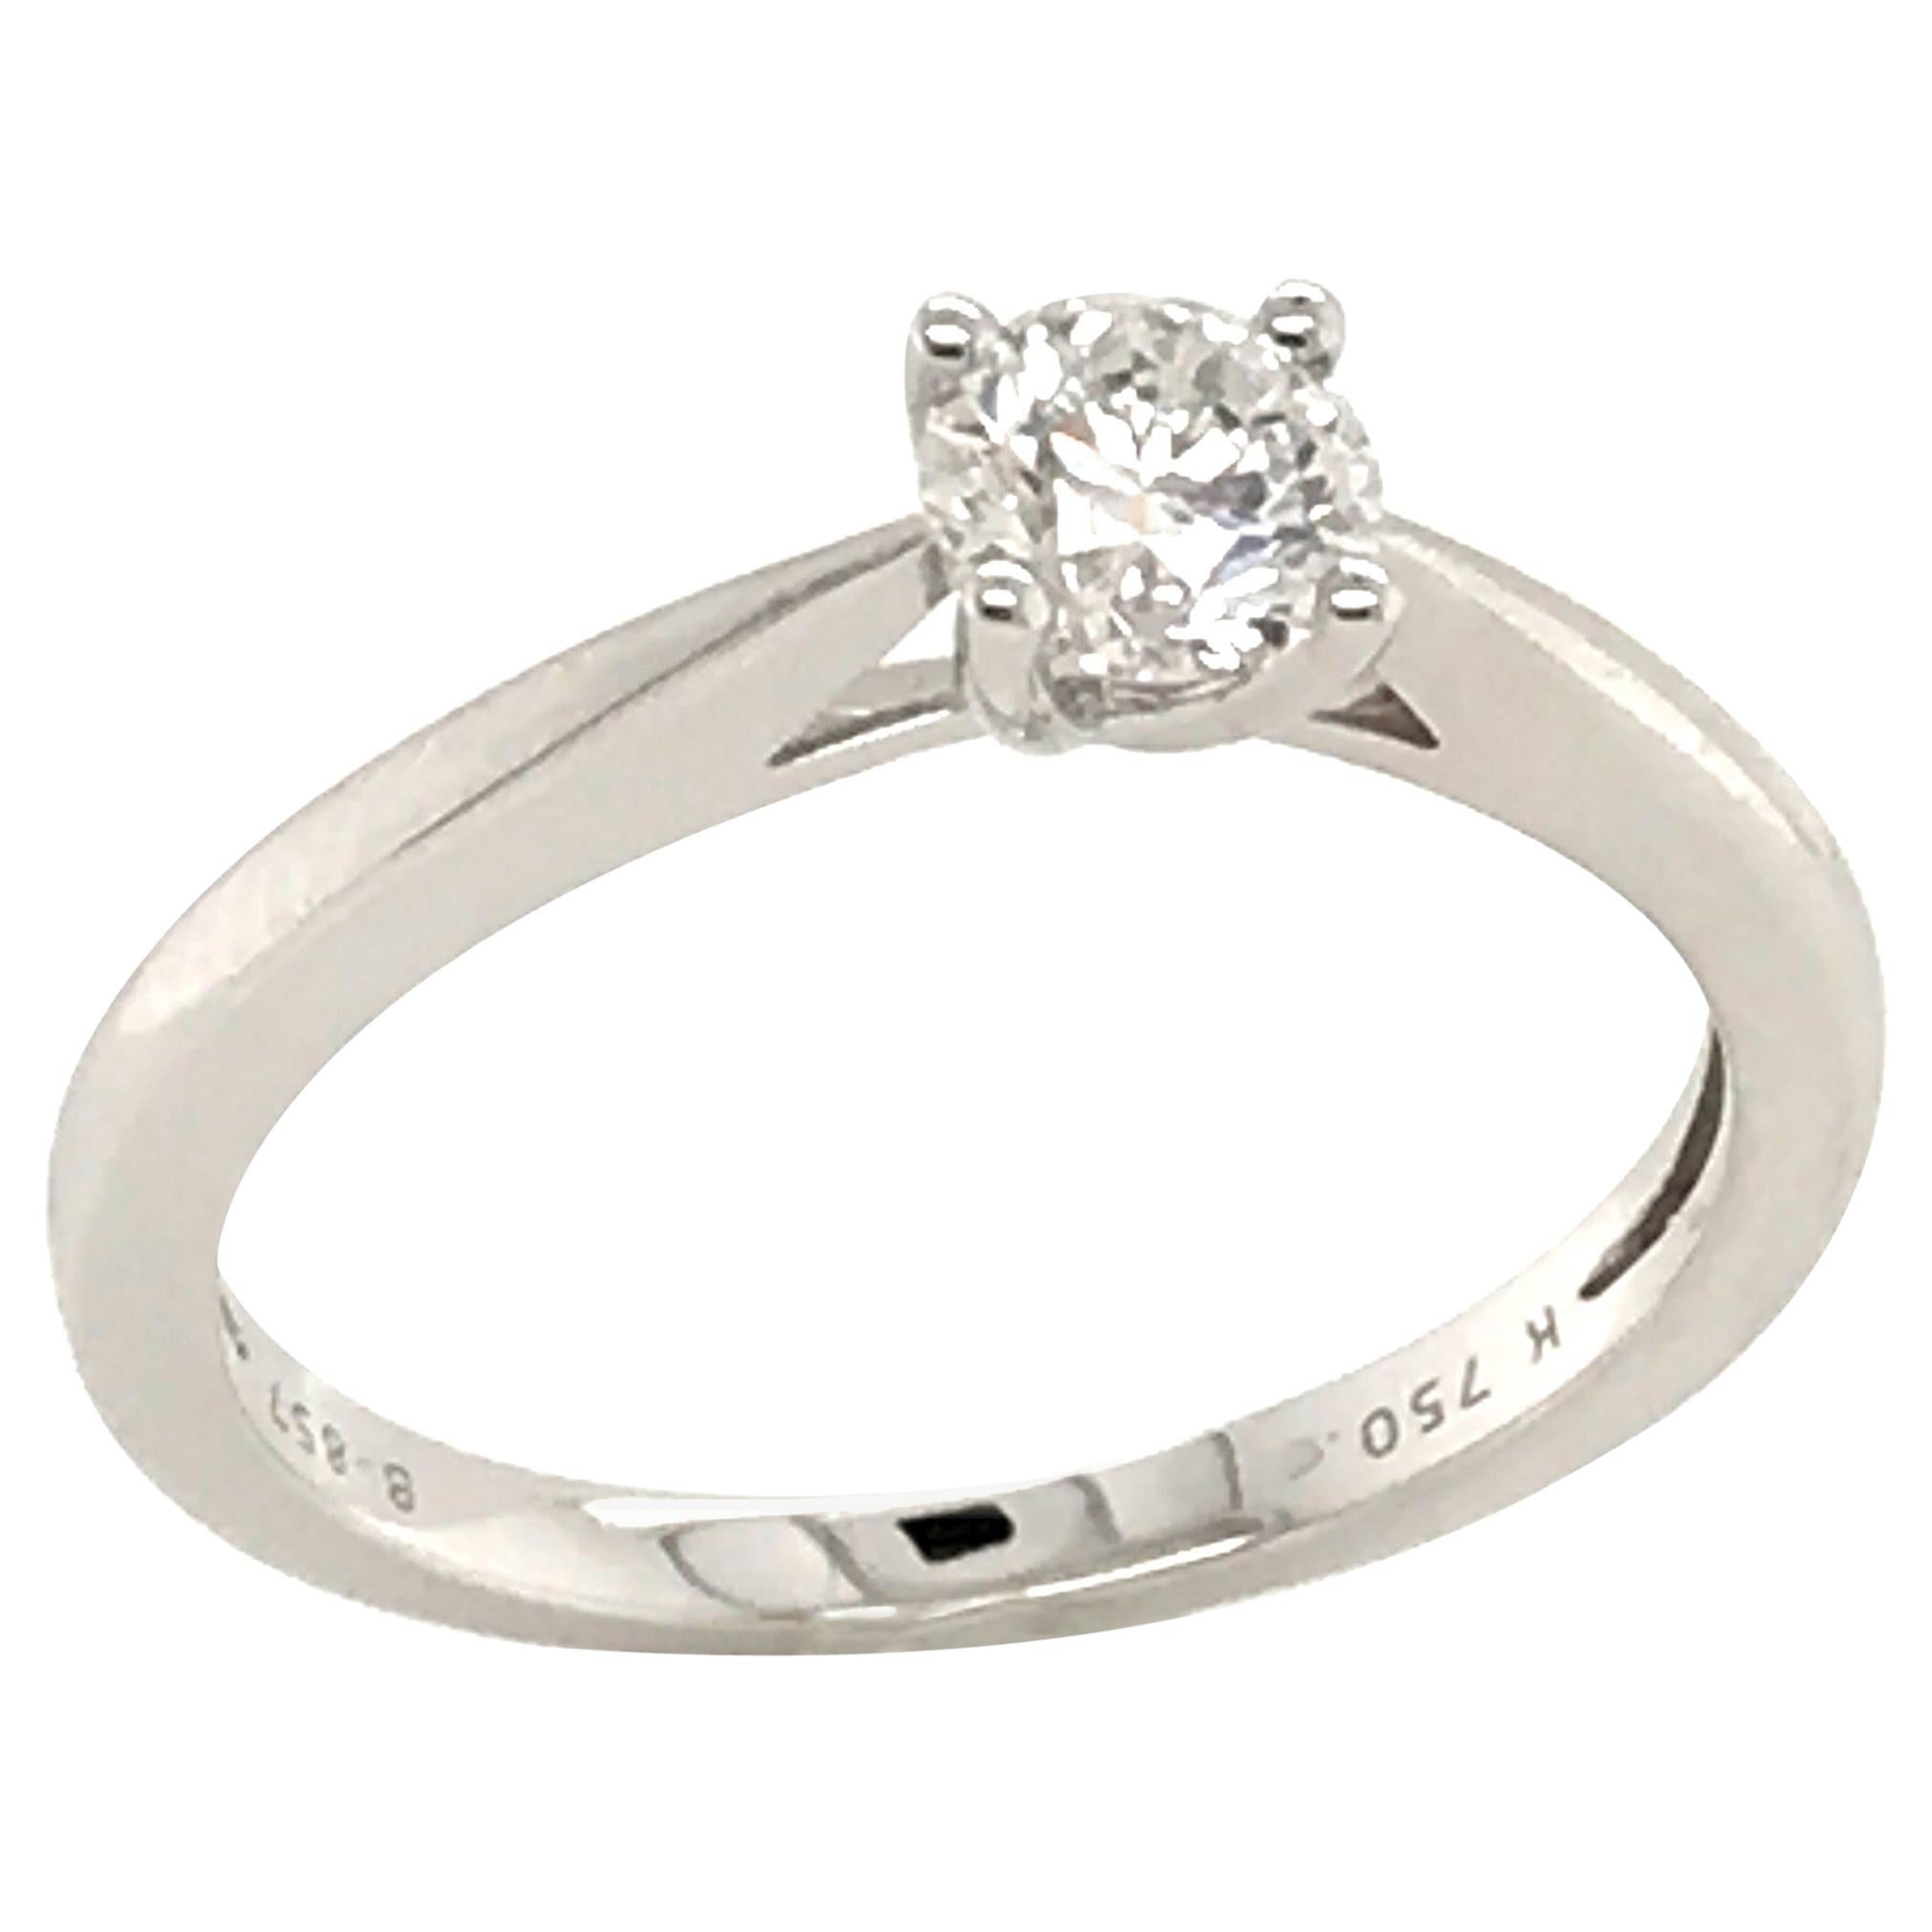 Solitaire Ring White Diamond Certified Color F White Gold 18 Karat For Sale